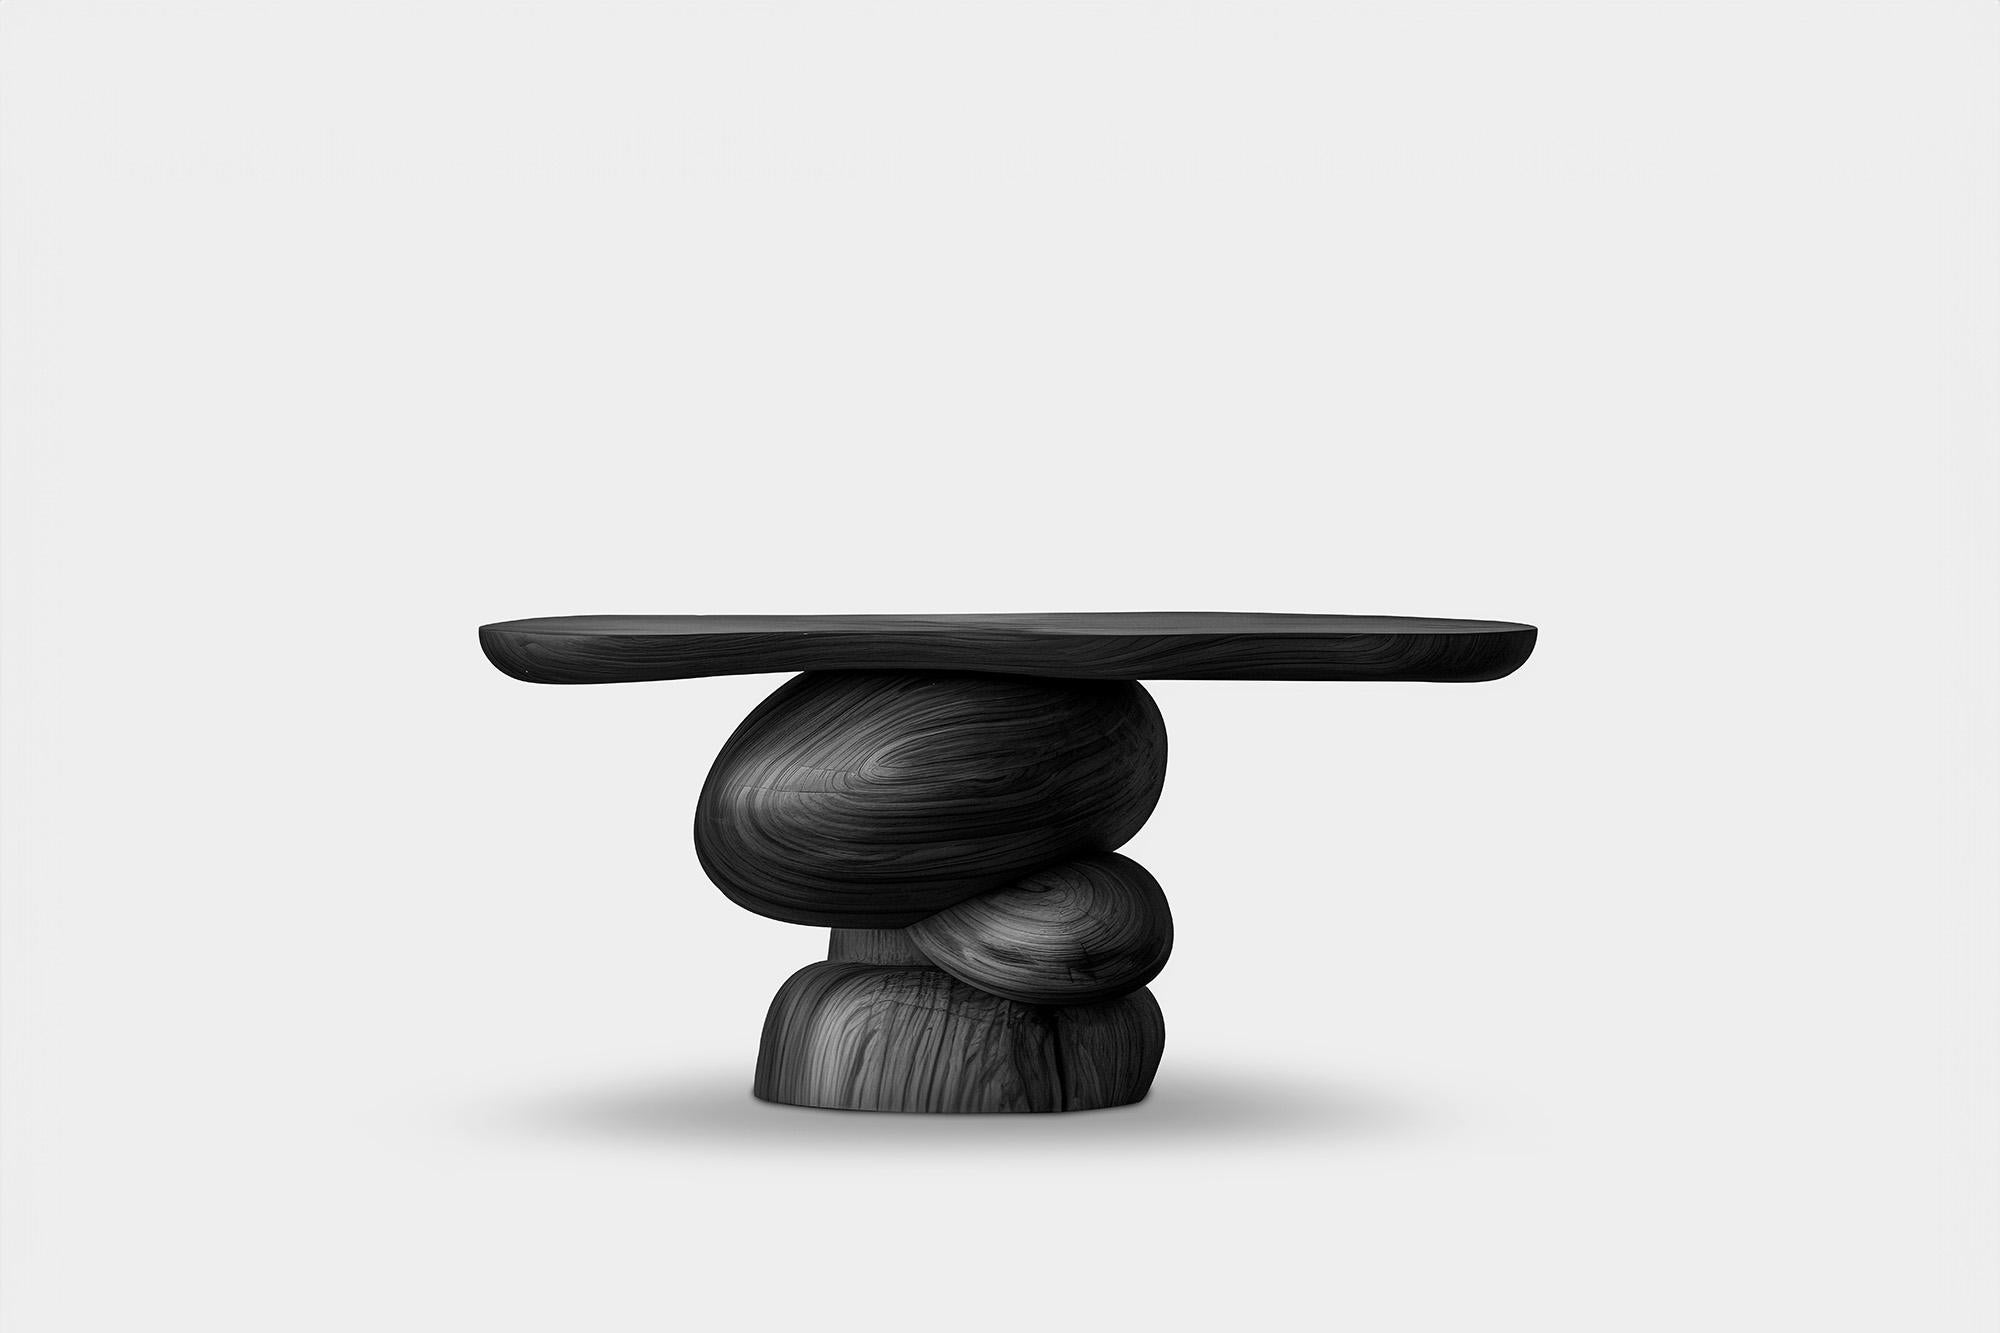 Joel Escalona's NONO Elefante Table 40, Wood Spheres, Elegant Lines

—————————————————————
Elefante Collection: A Harmony of Design and Heritage by NONO

Crafting Elegance with a Modernist Touch

NONO, renowned for its decade-long journey in